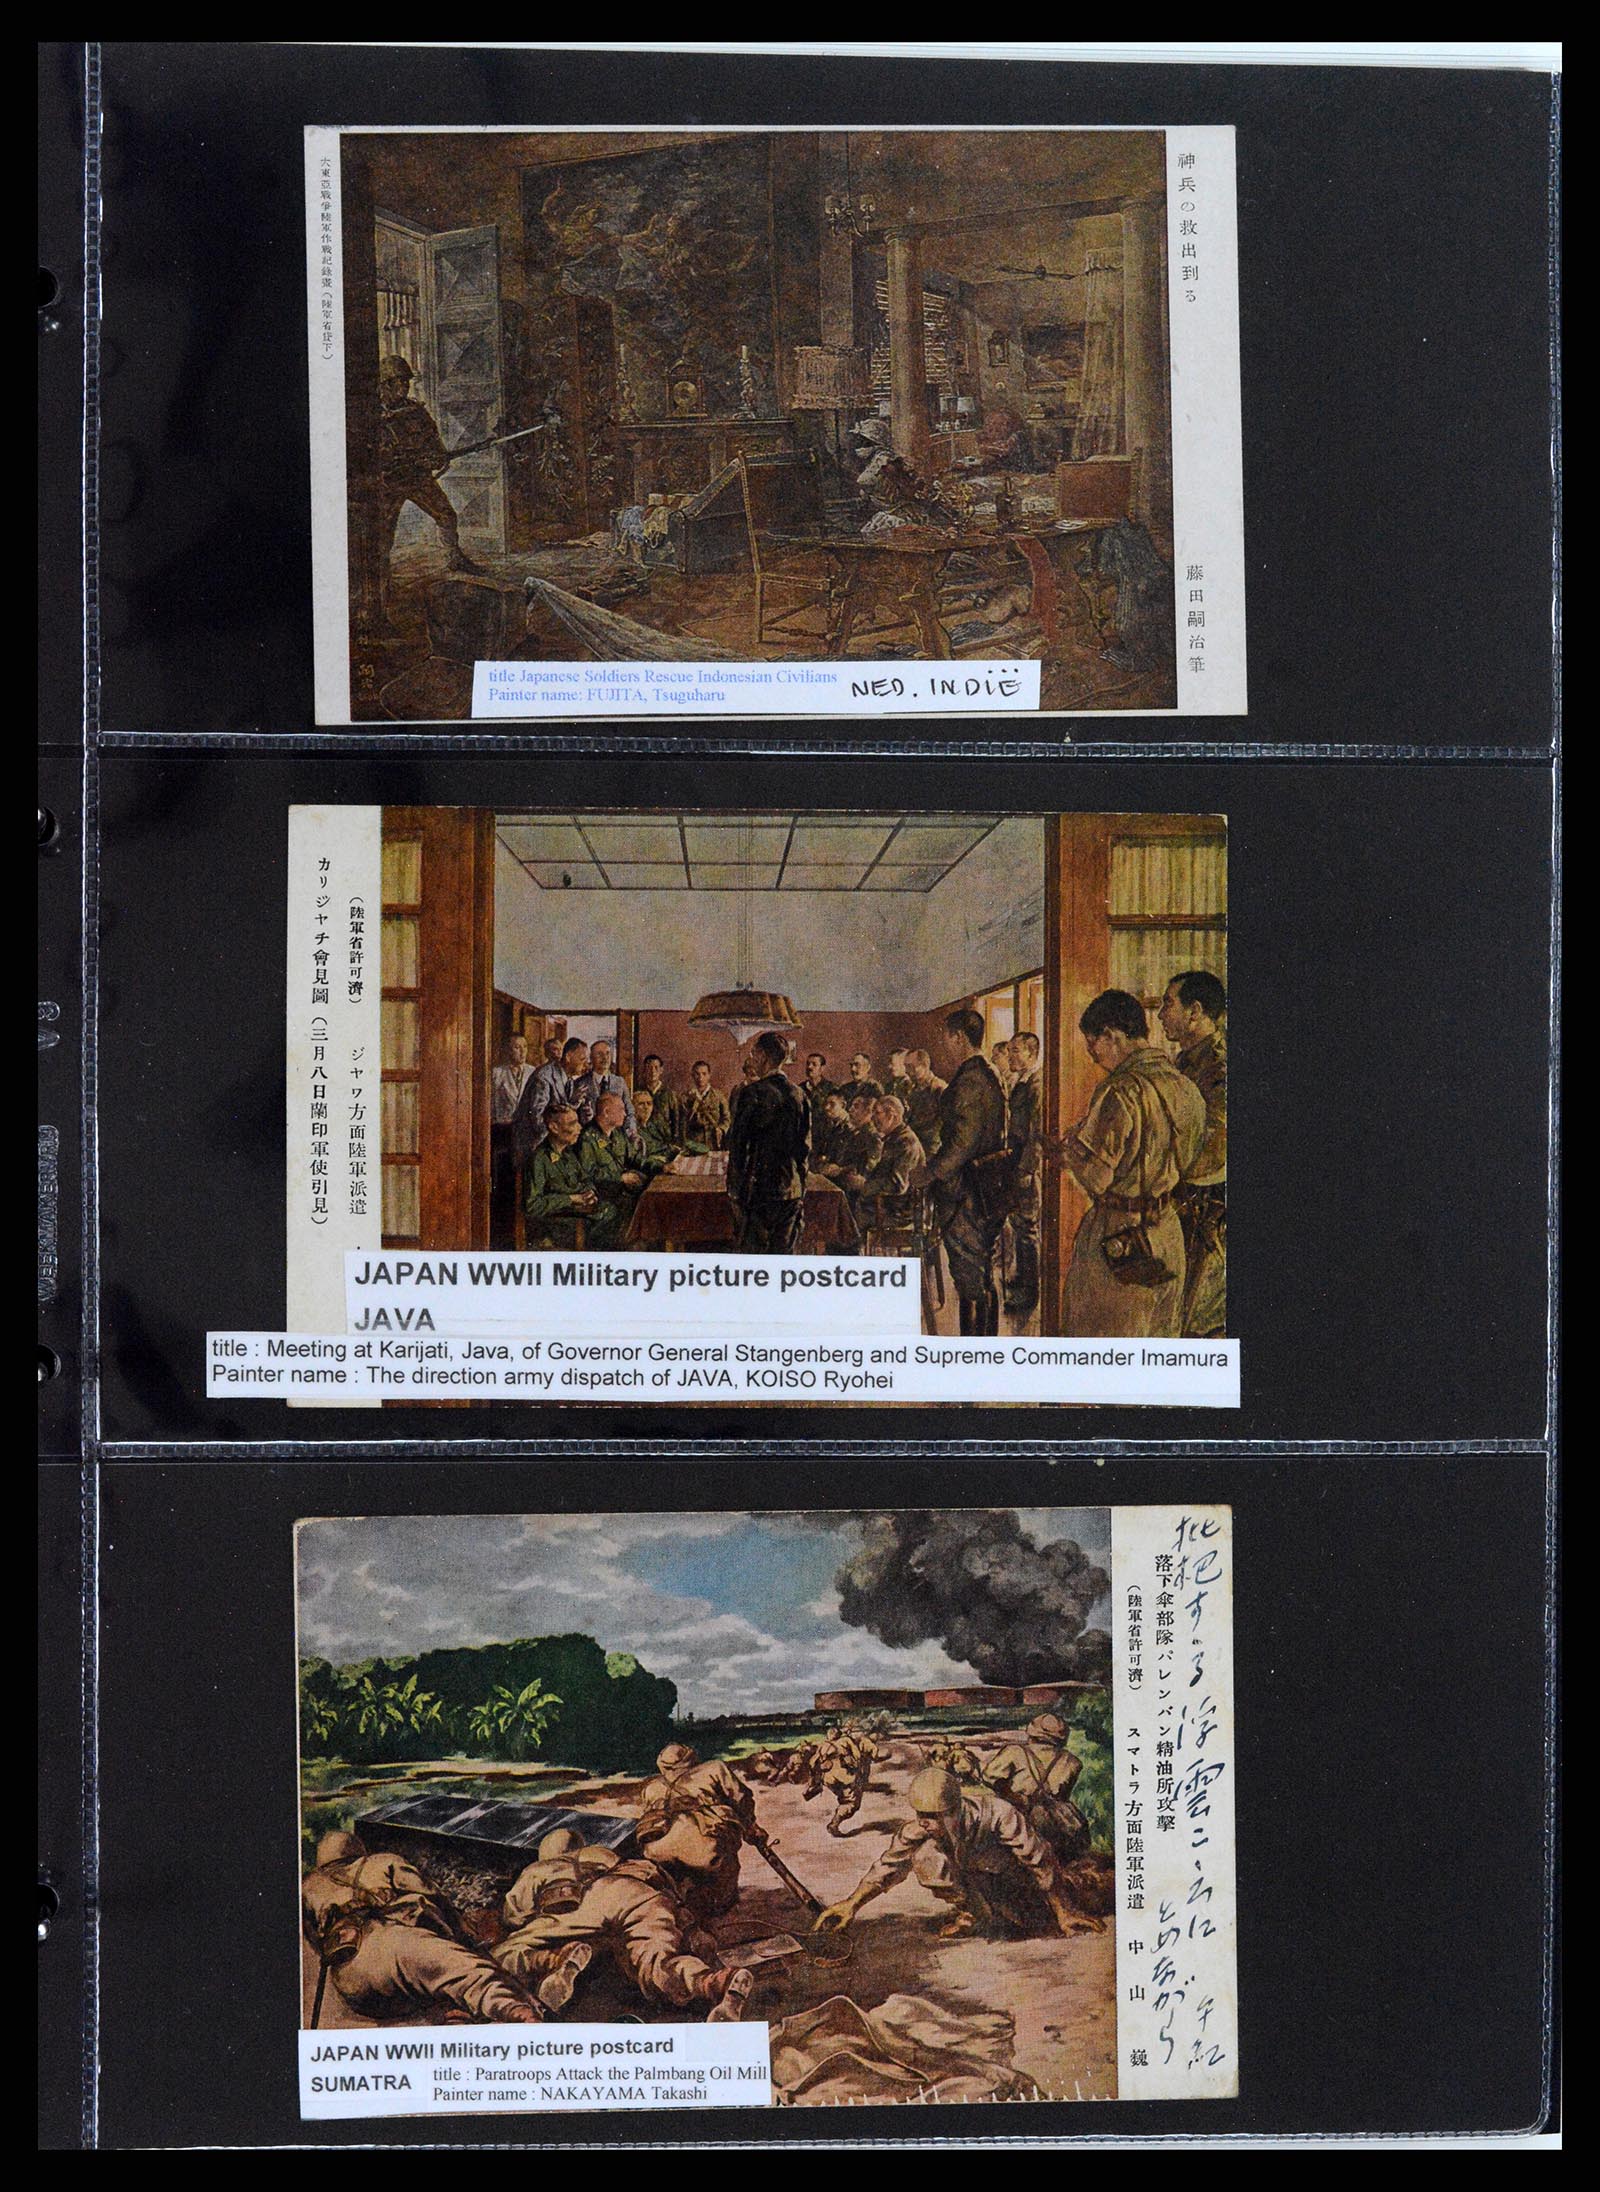 37423 042 - Stamp collection 37423 Dutch Indies Japanese occupation covers 1942-1945